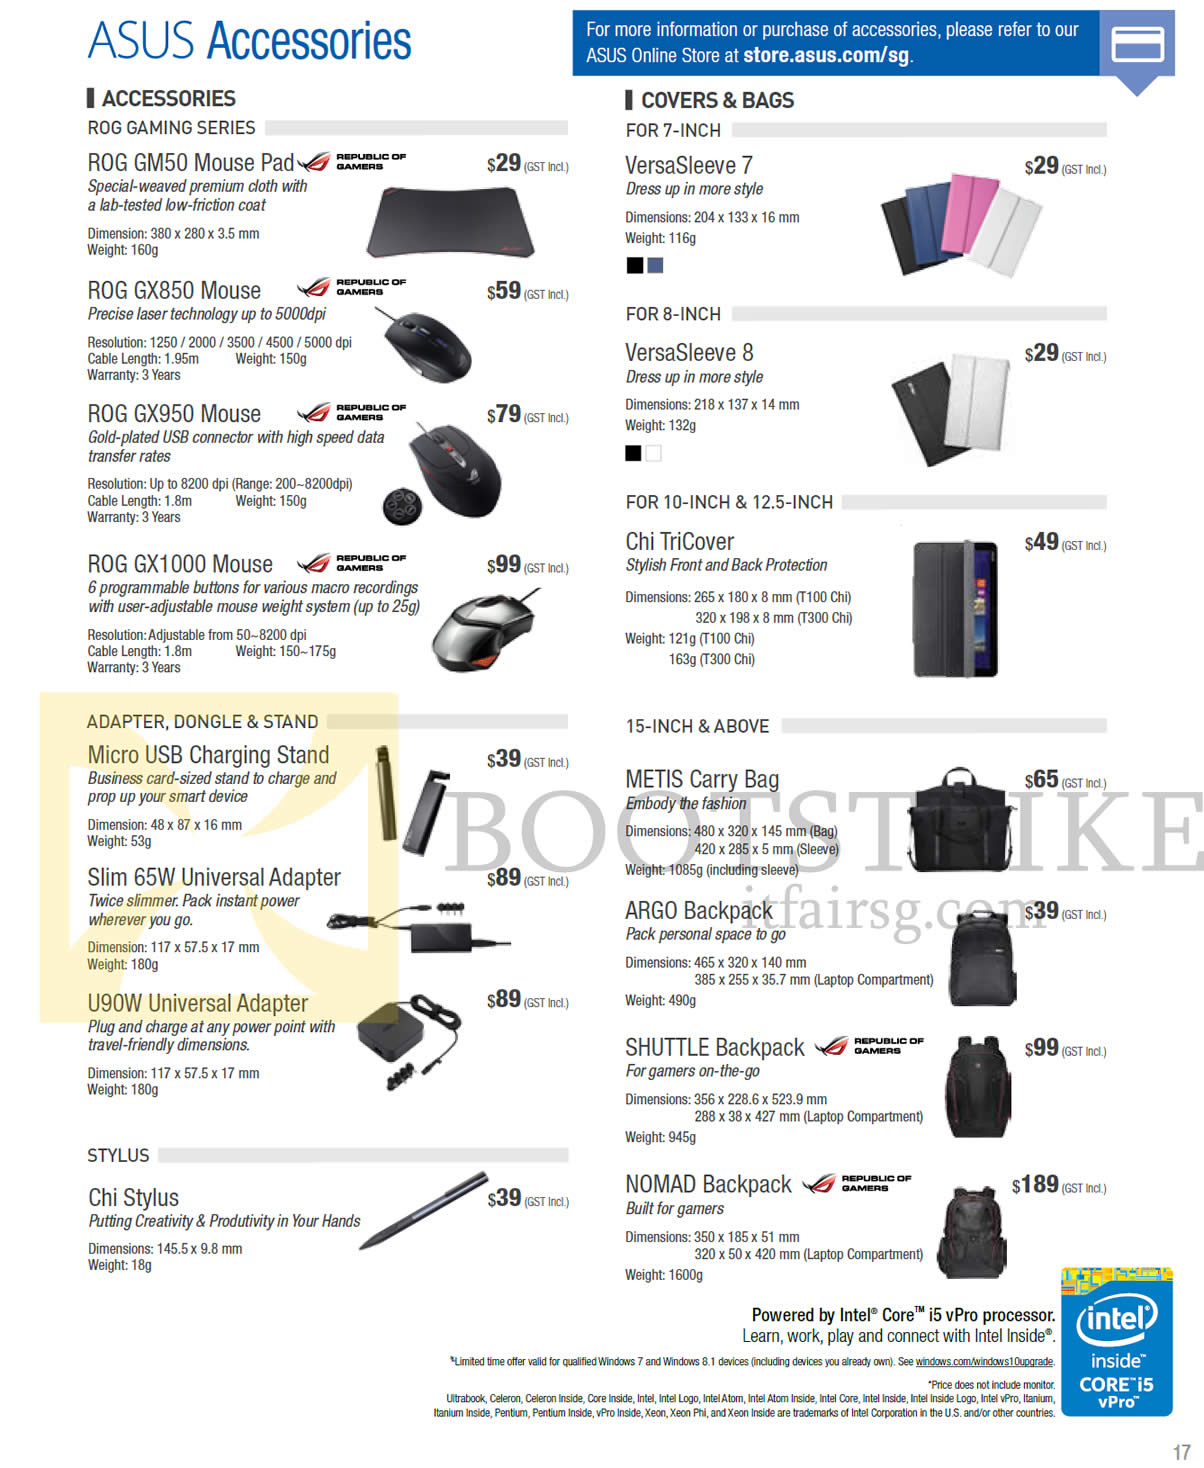 COMEX 2015 price list image brochure of ASUS Accessories, Covers, Bags, Backpacks, Sleeves, Mousepads, Mouse, Universal Adapters, Stylus Pen